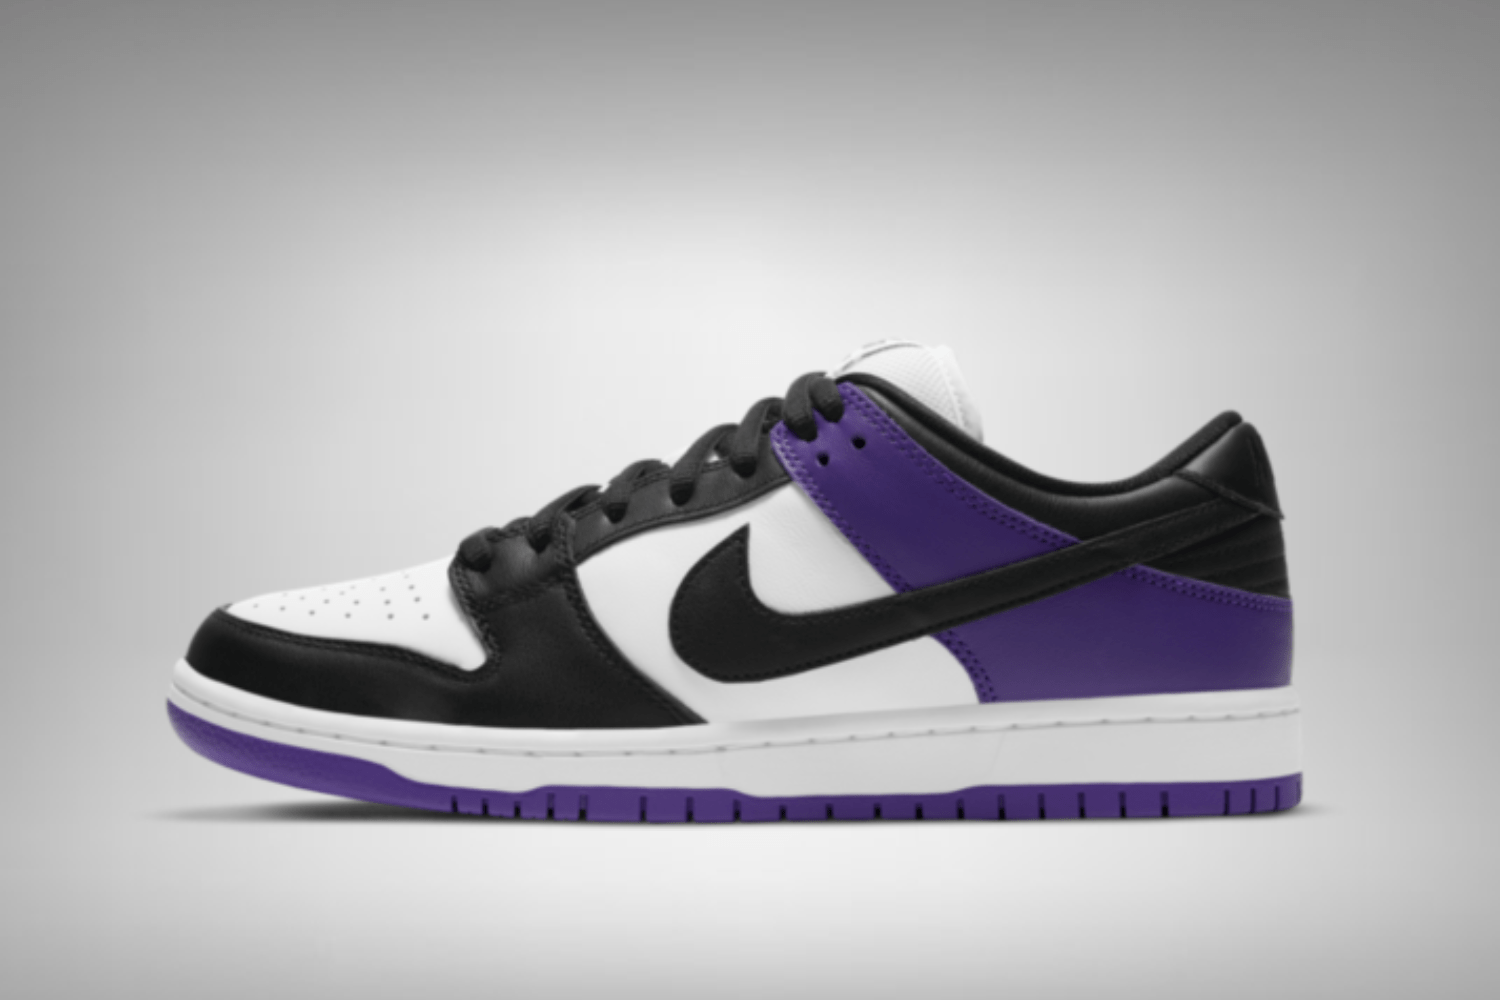 The Nike SB Dunk Low 'Court Purple' is getting a restock